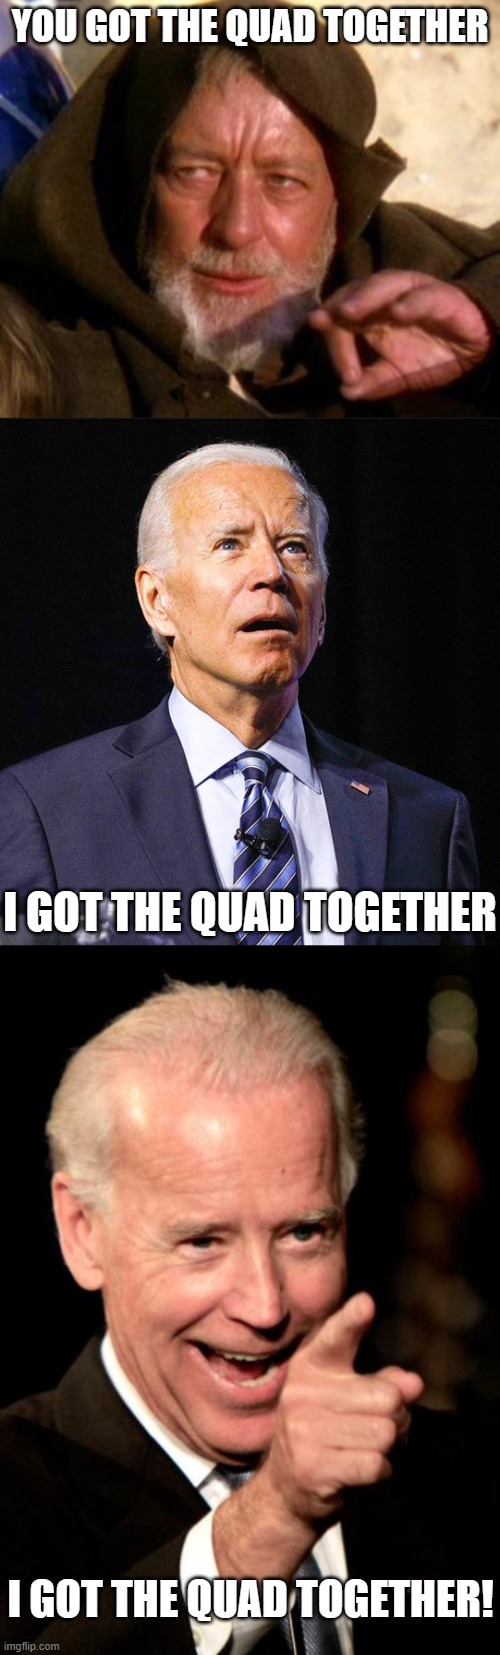 Actually, it was revived under Trump. Do they just program this jackass like the winter soldier? | YOU GOT THE QUAD TOGETHER; I GOT THE QUAD TOGETHER; I GOT THE QUAD TOGETHER! | image tagged in obi wan kenobi jedi mind trick,joe biden,politics,funny memes,government corruption,outrage | made w/ Imgflip meme maker